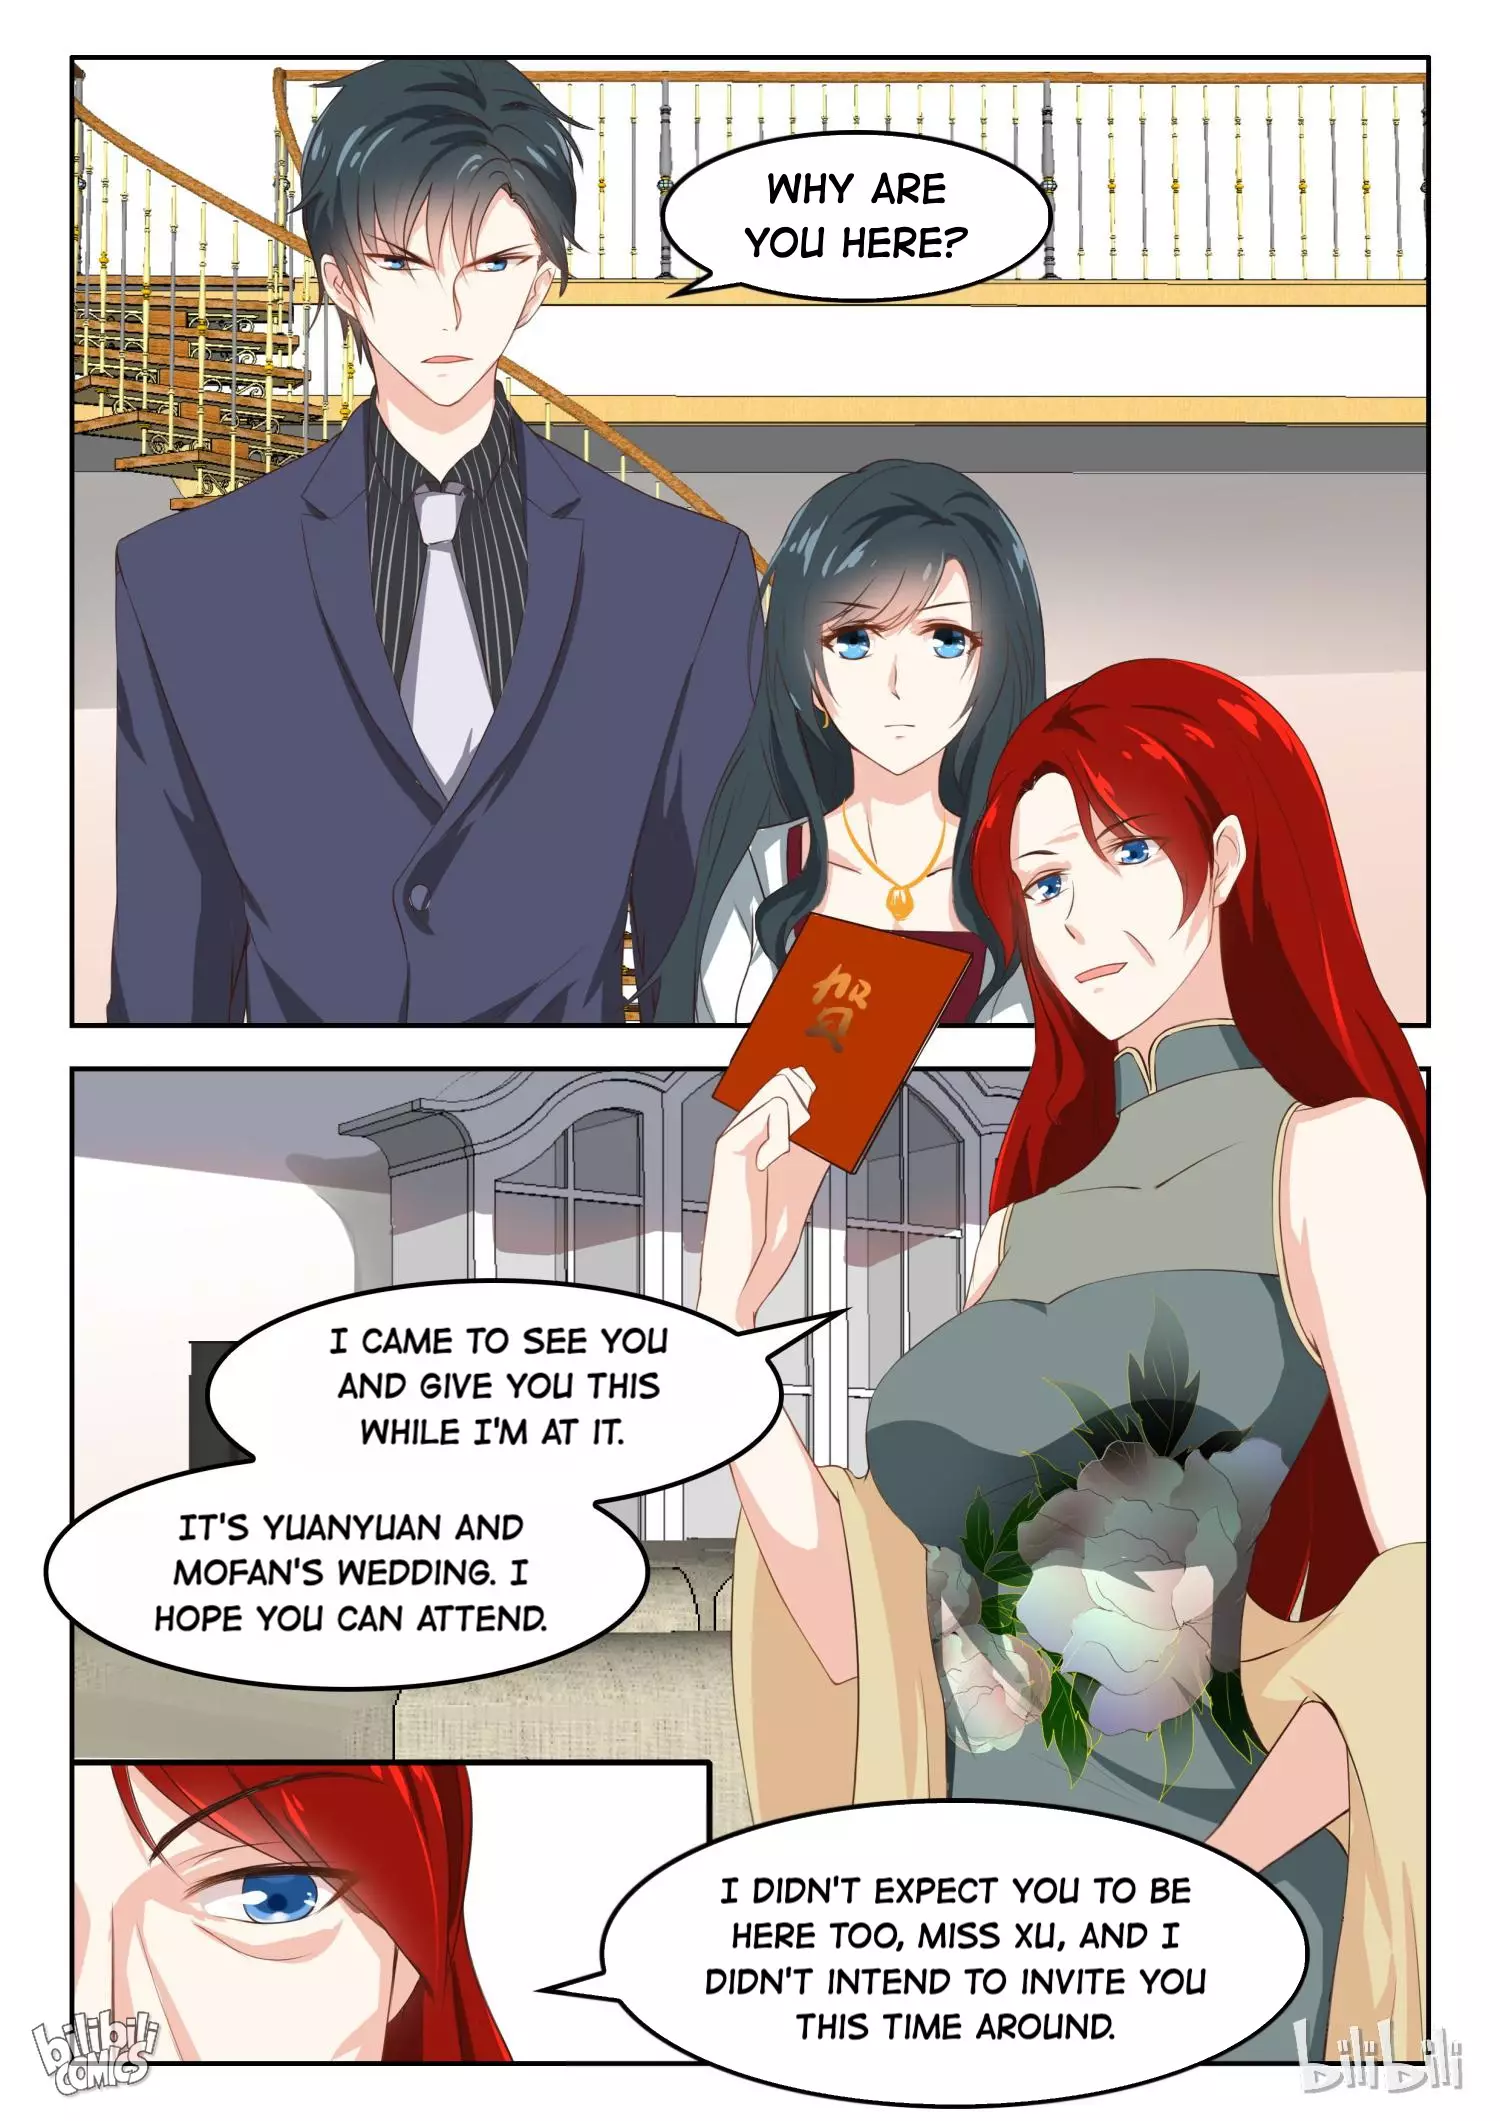 Scheming Marriage - 59 page 1-2b256636